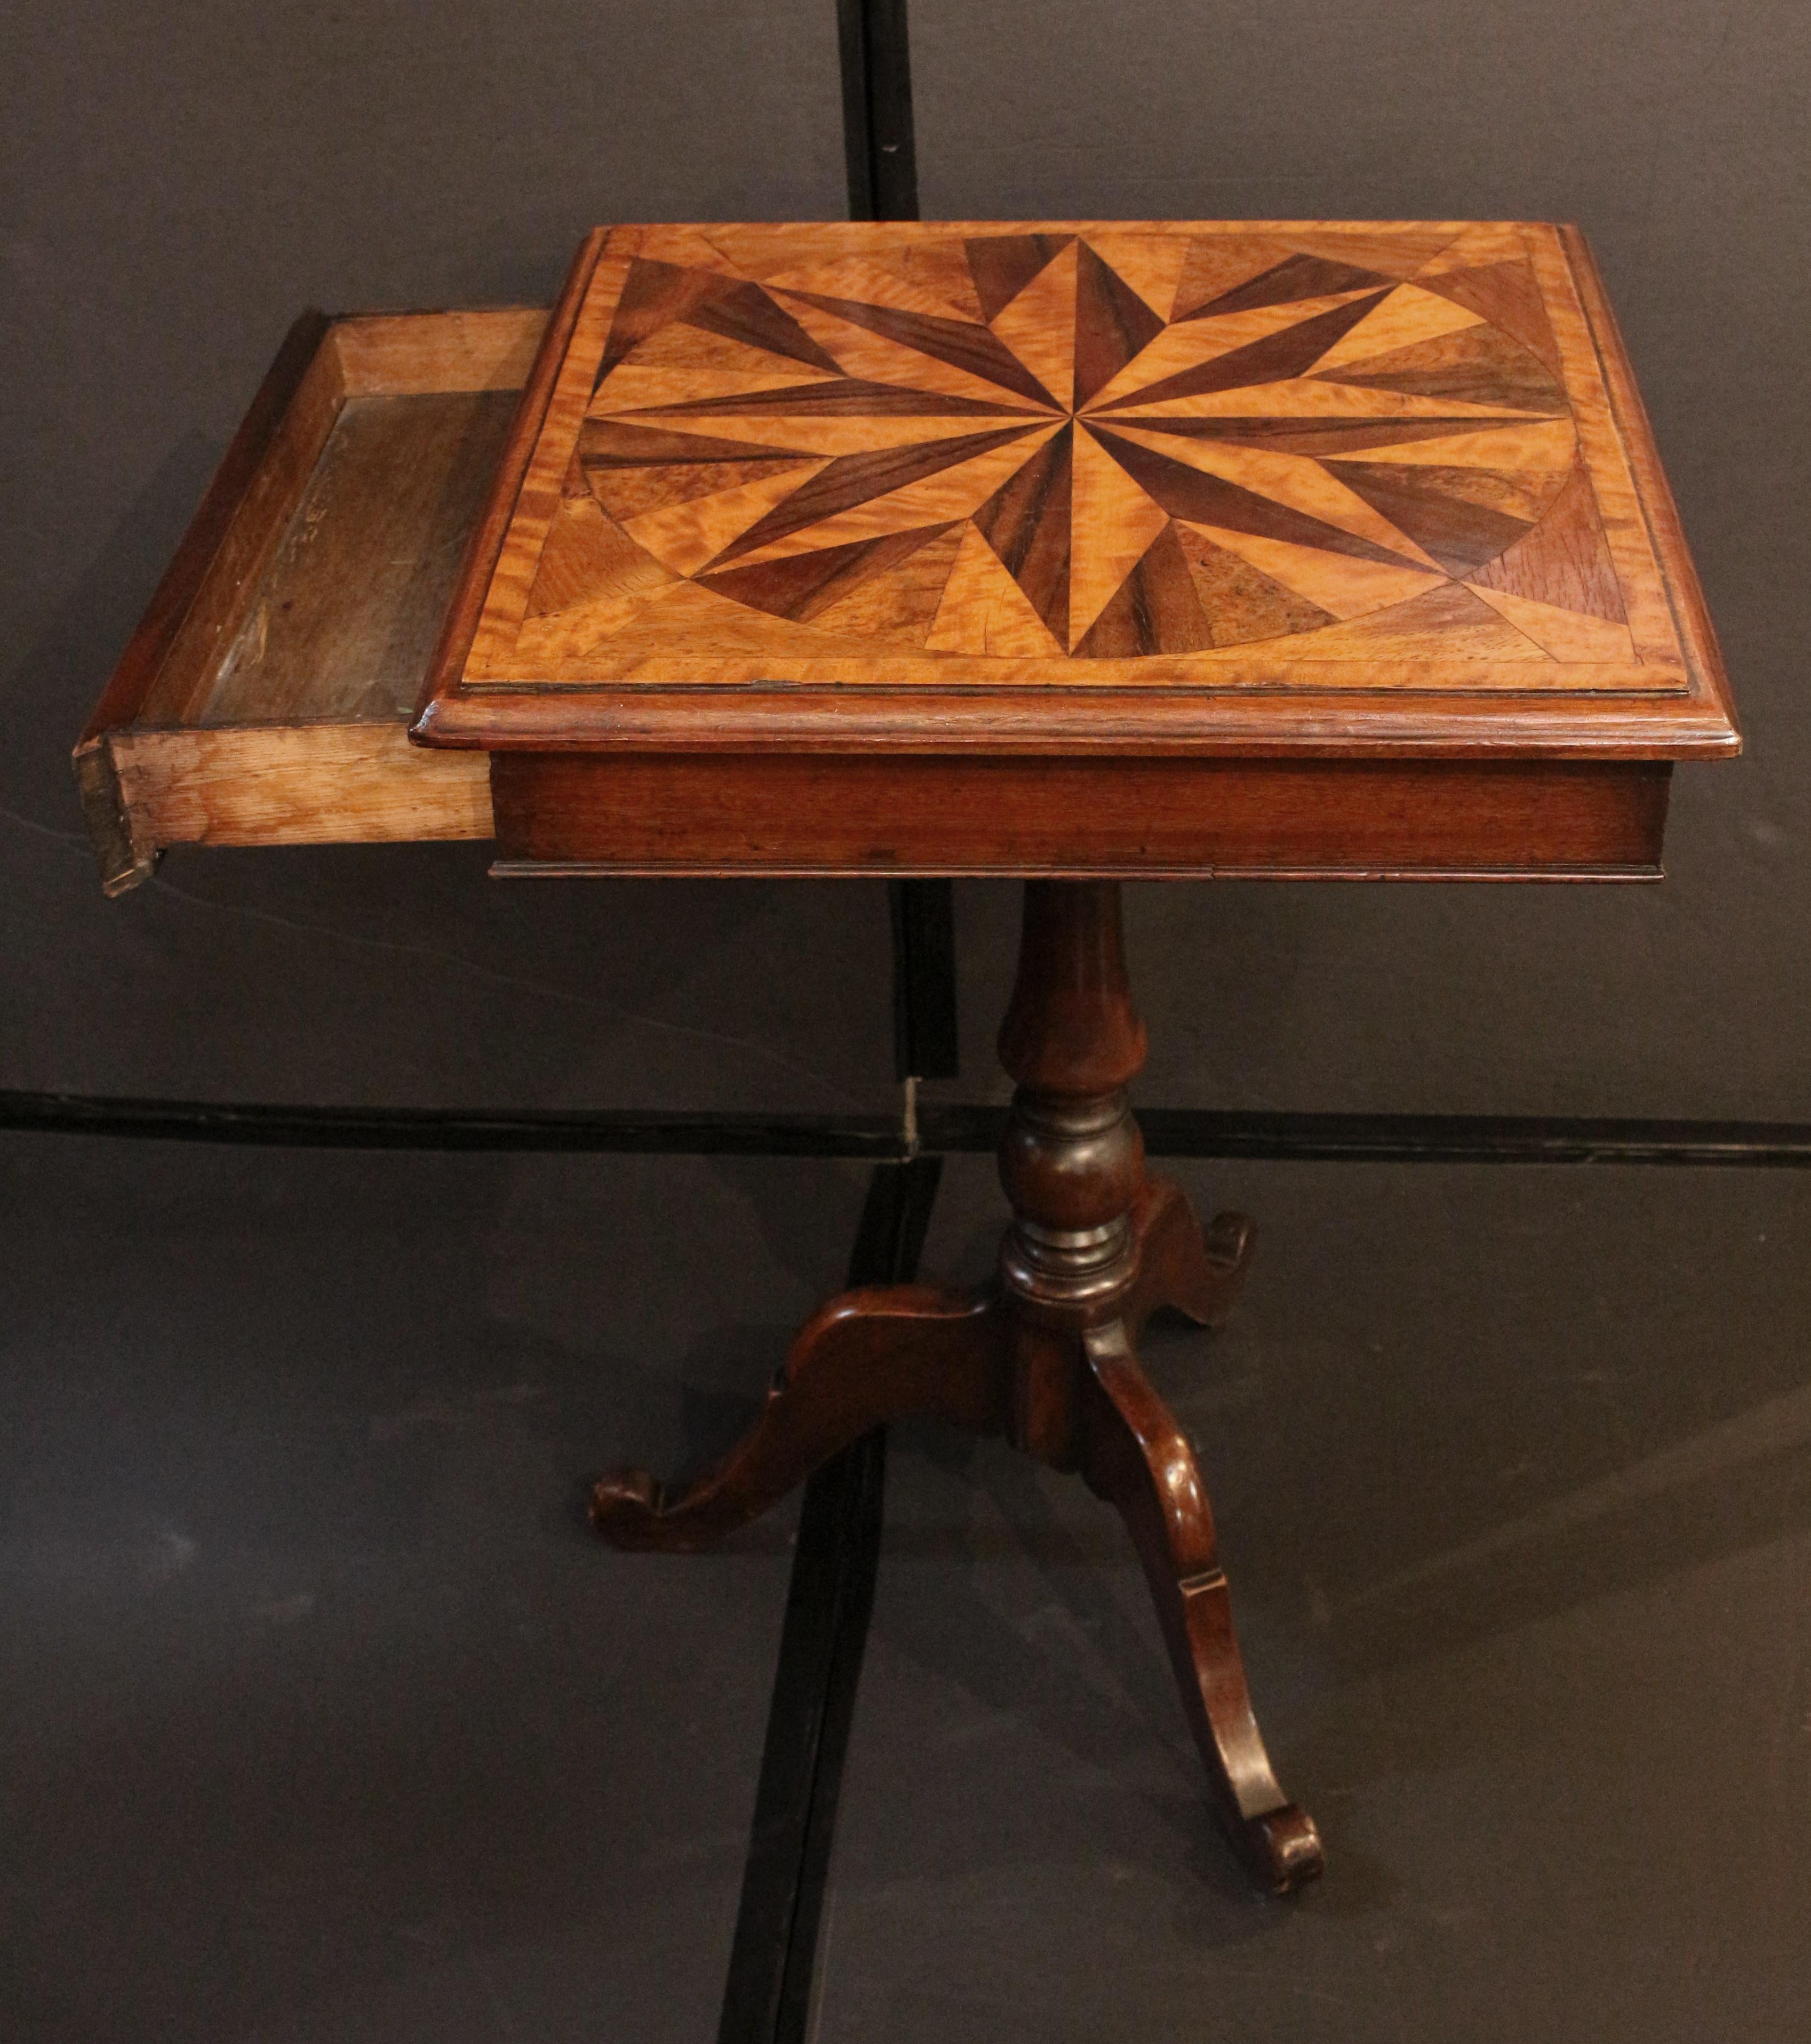 Circa 1860 Star Inlaid Top Side Table with Drawer, English In Good Condition For Sale In Chapel Hill, NC